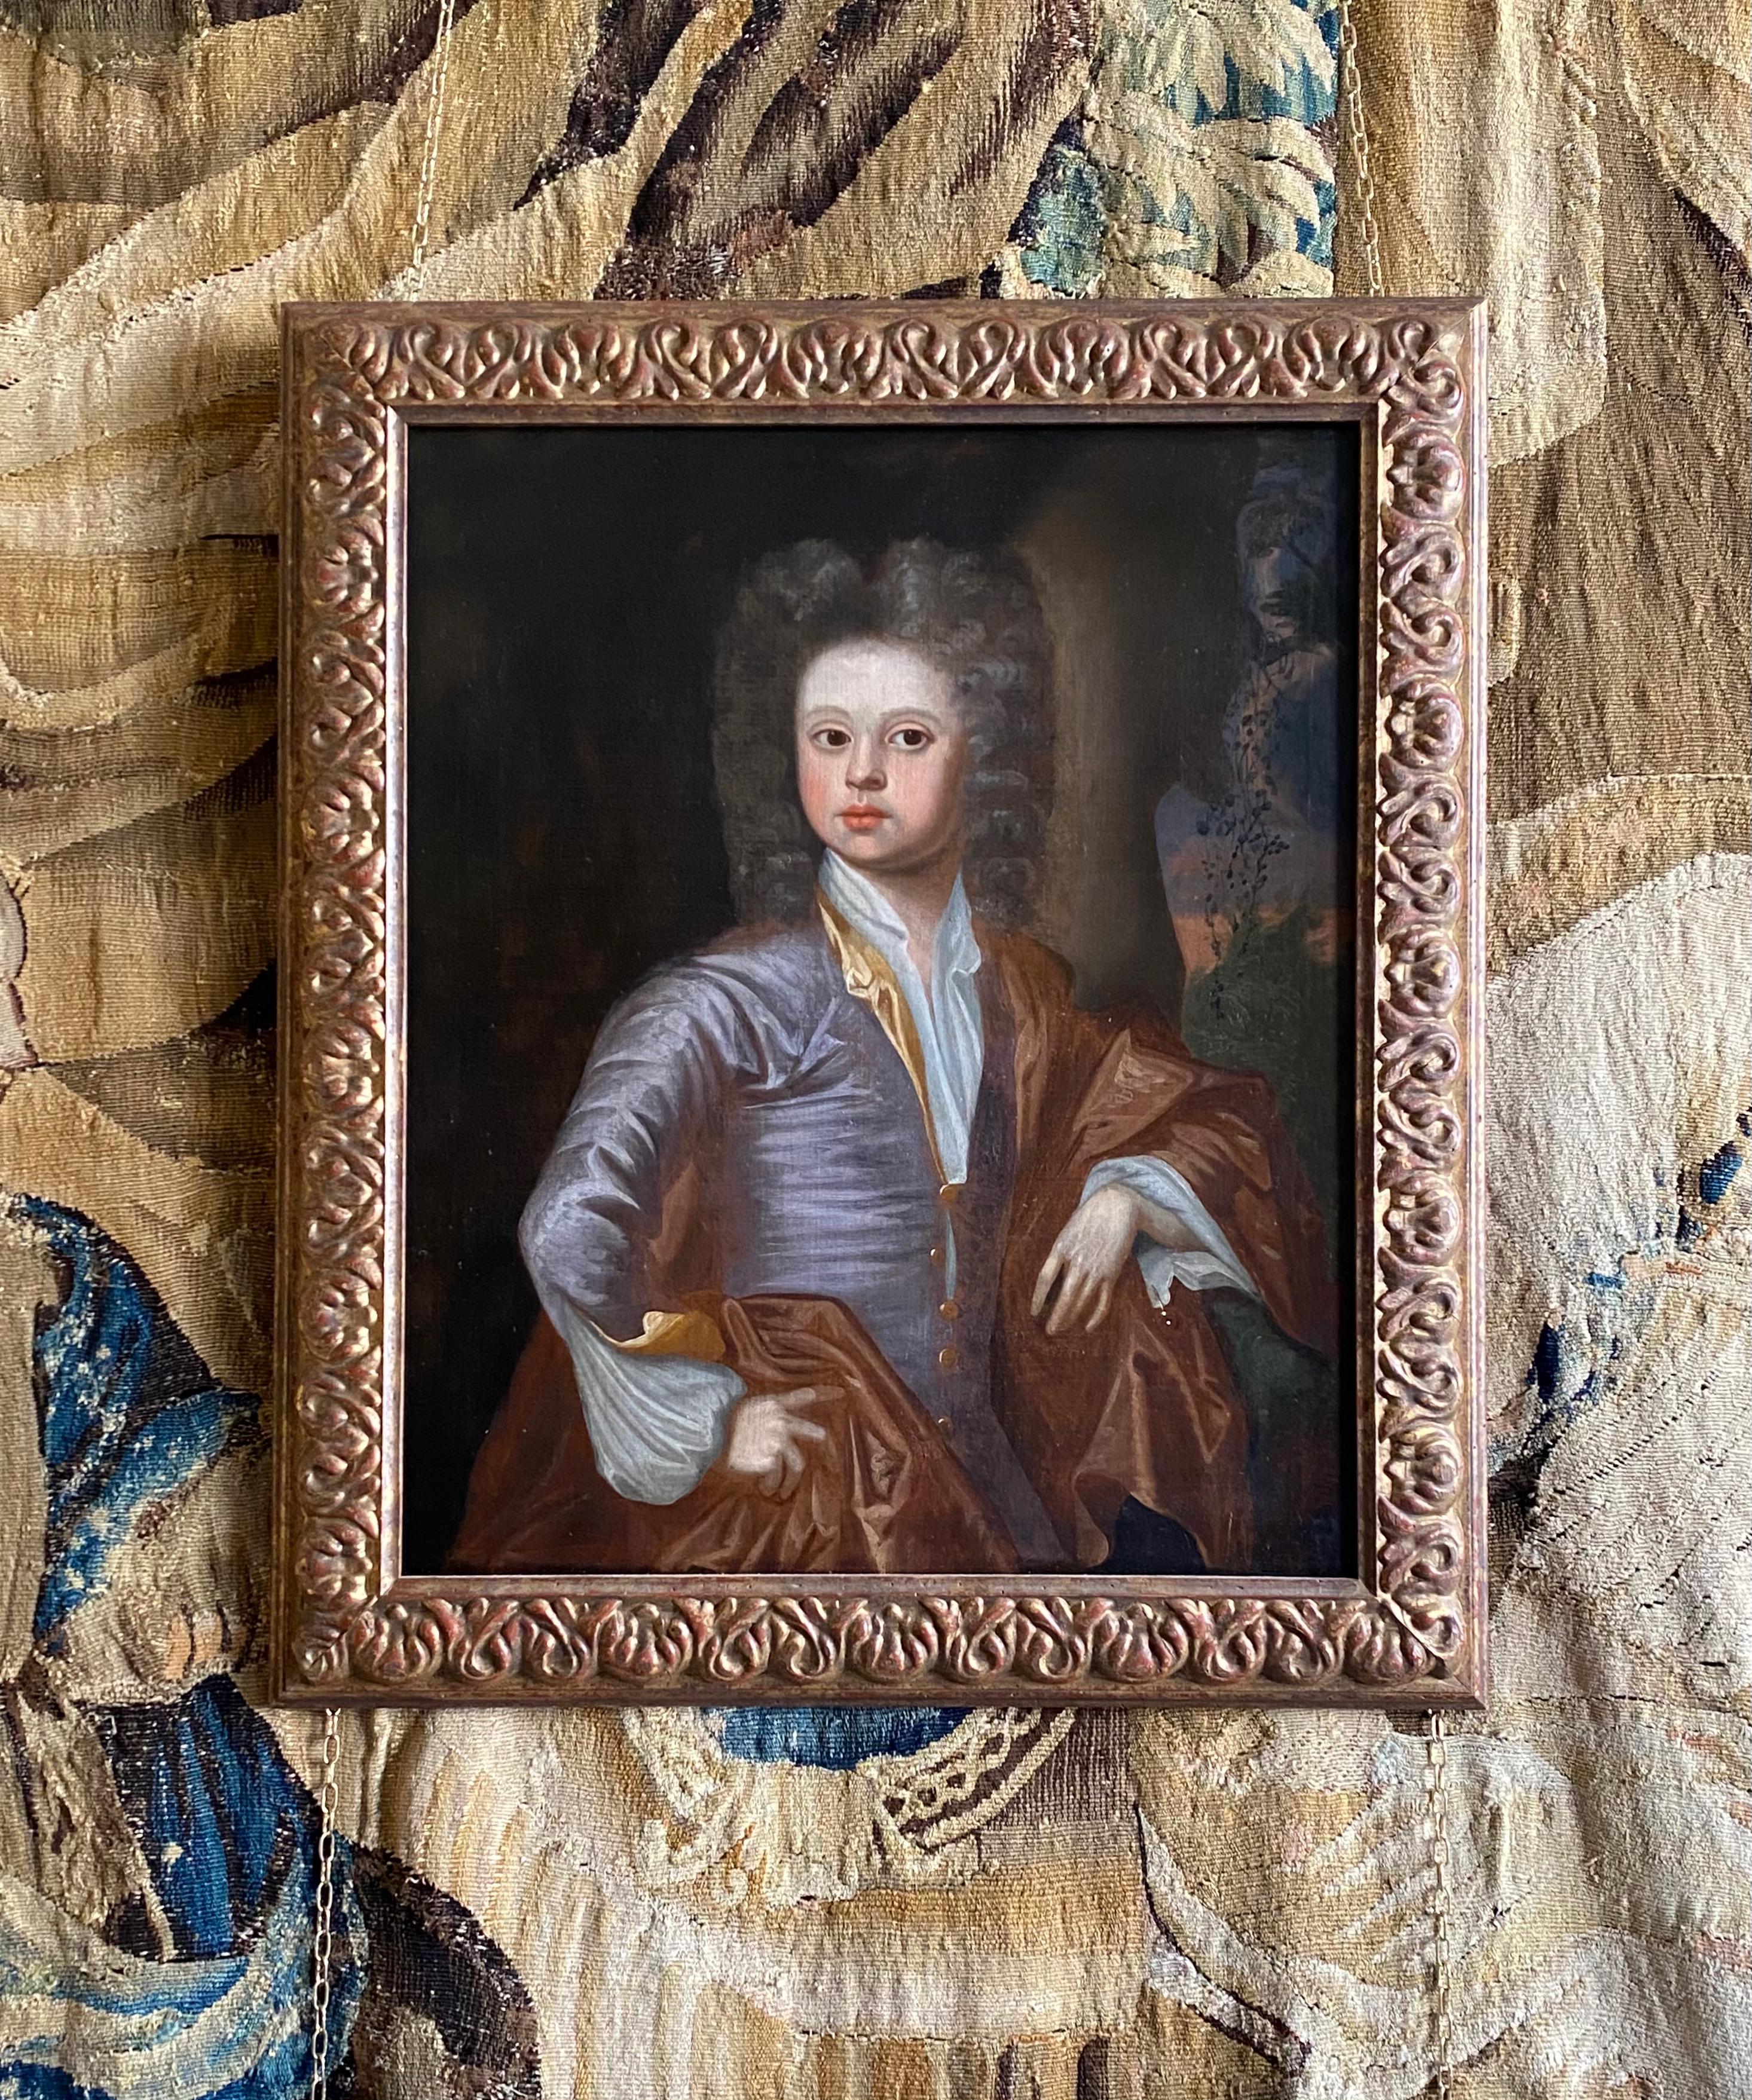 17TH CENTURY PORTRAIT OF A YOUNG GENTLEMAN C.1685 - CIRCLE OF JOHANN KERSEBOOM.
A decorative and desirable portrait of a young gentleman dating to c.1685, by an artist in the circle of Johann Kerseboom. The fashionable and expensively dressed young